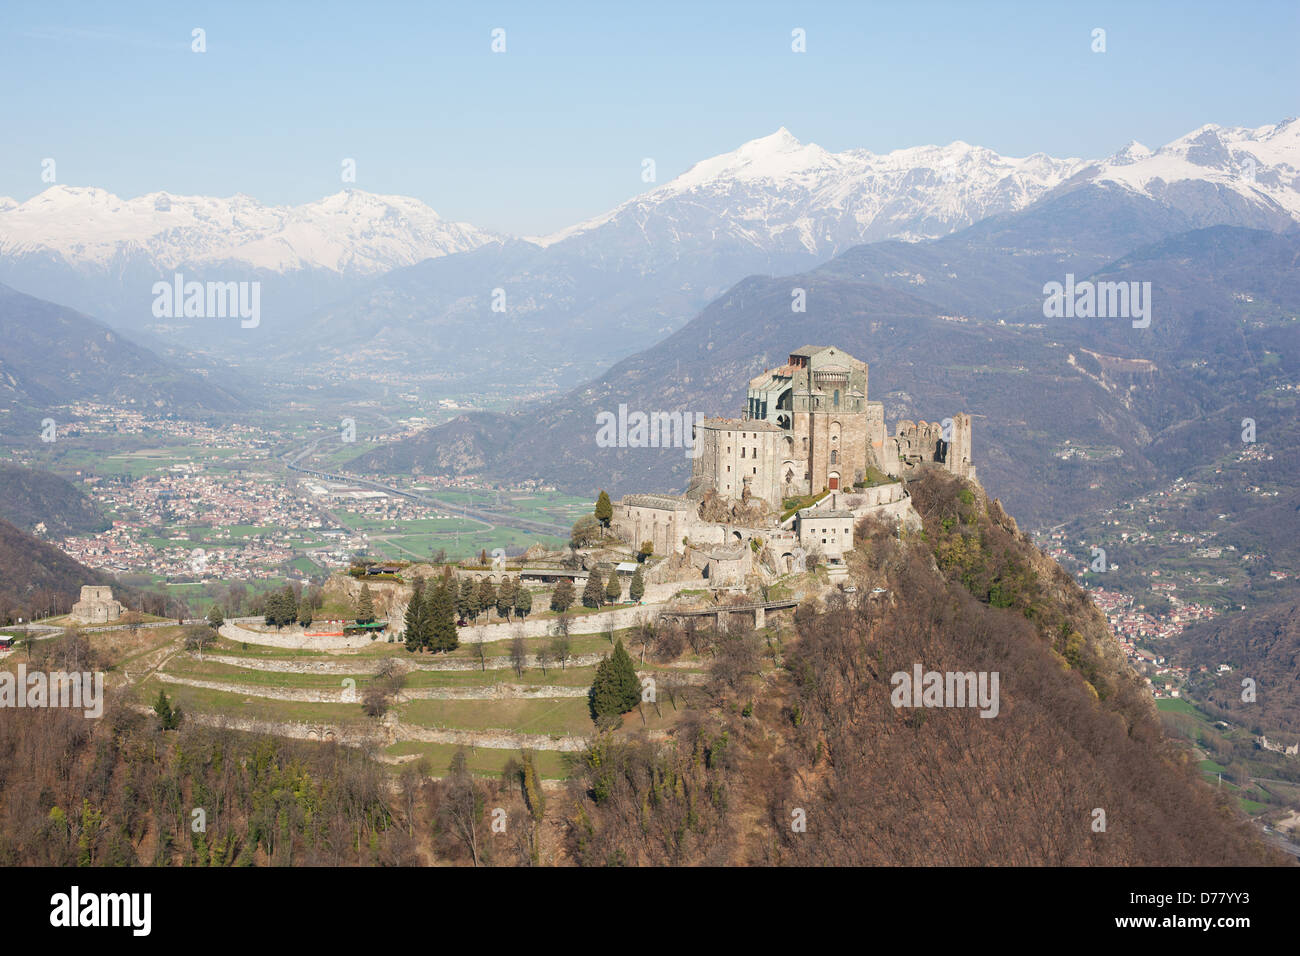 AERIAL VIEW. Abbey on a rocky promontory, high above the Susa Valley. Sacra di San Michele, Metropolitan City of Turin, Piedmont, Italy. Stock Photo